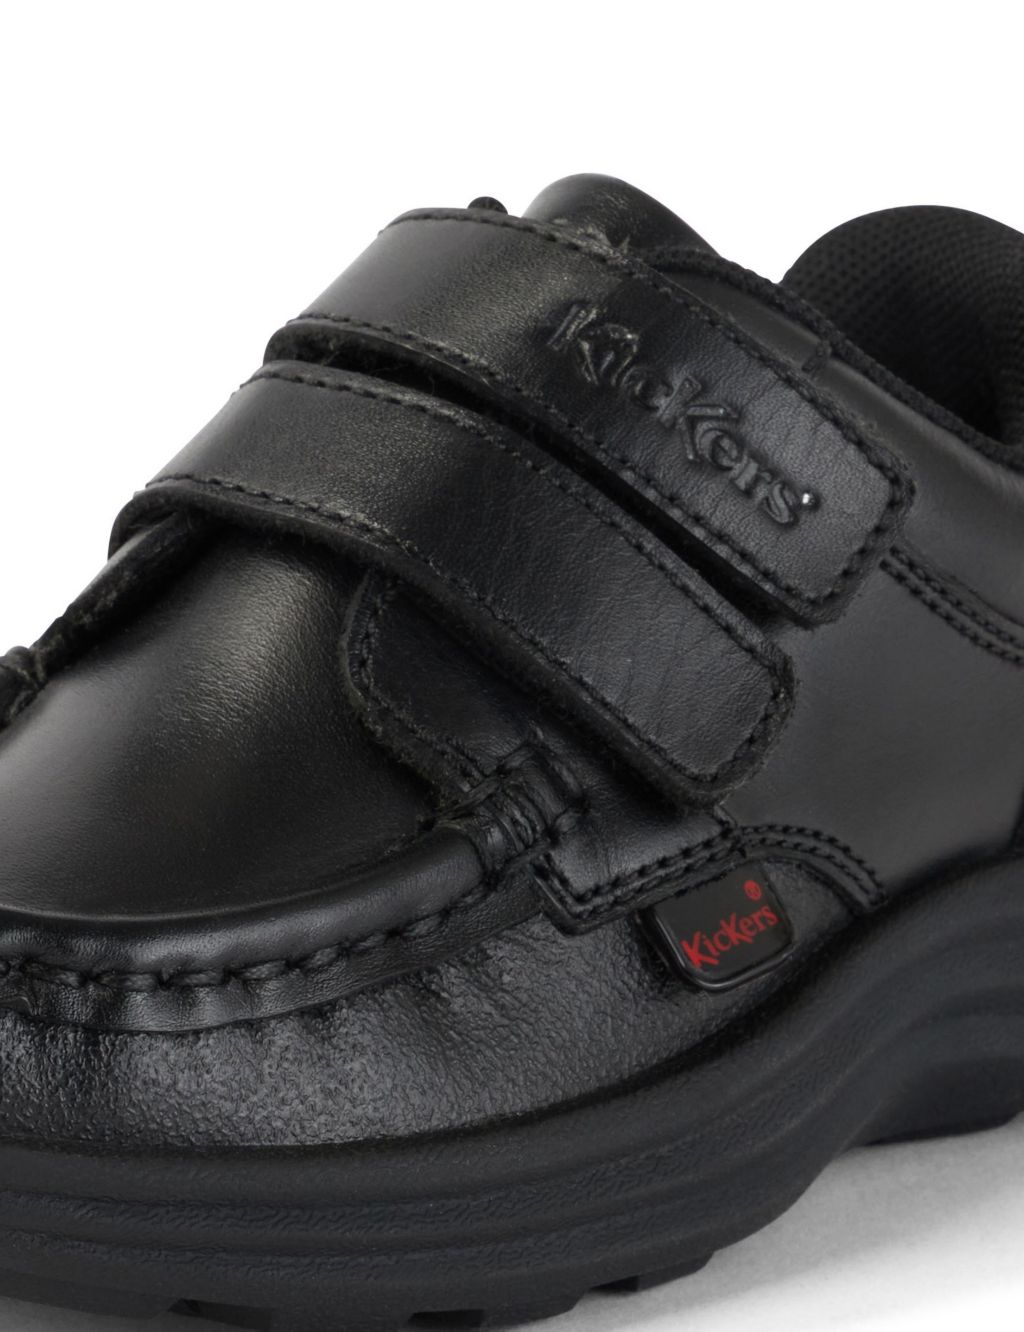 Kids' Leather Riptape School Shoes (7 Small - 12 Small) image 3